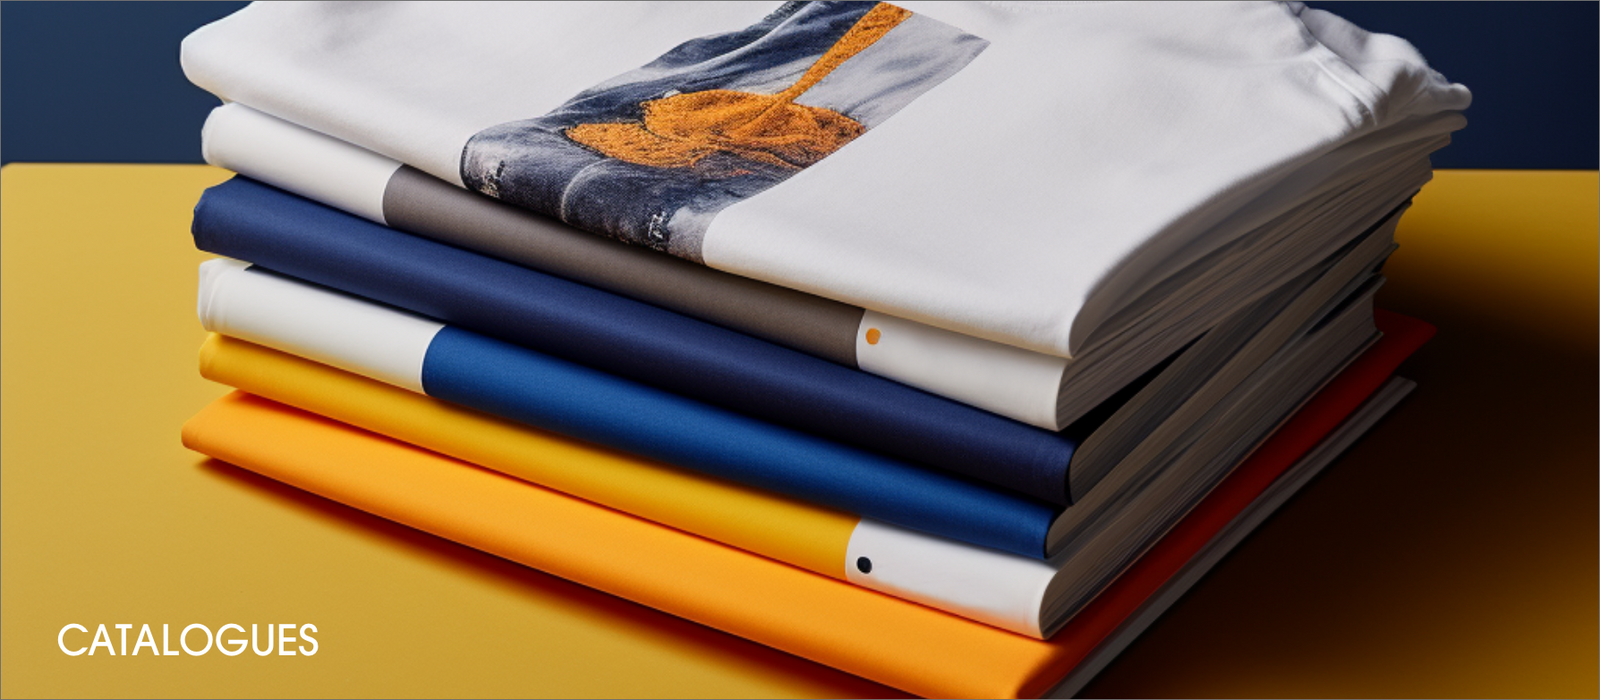 A stack of white, yellow and blue t-shirts and catalogues pilled up on a yellow table with a navy background. 